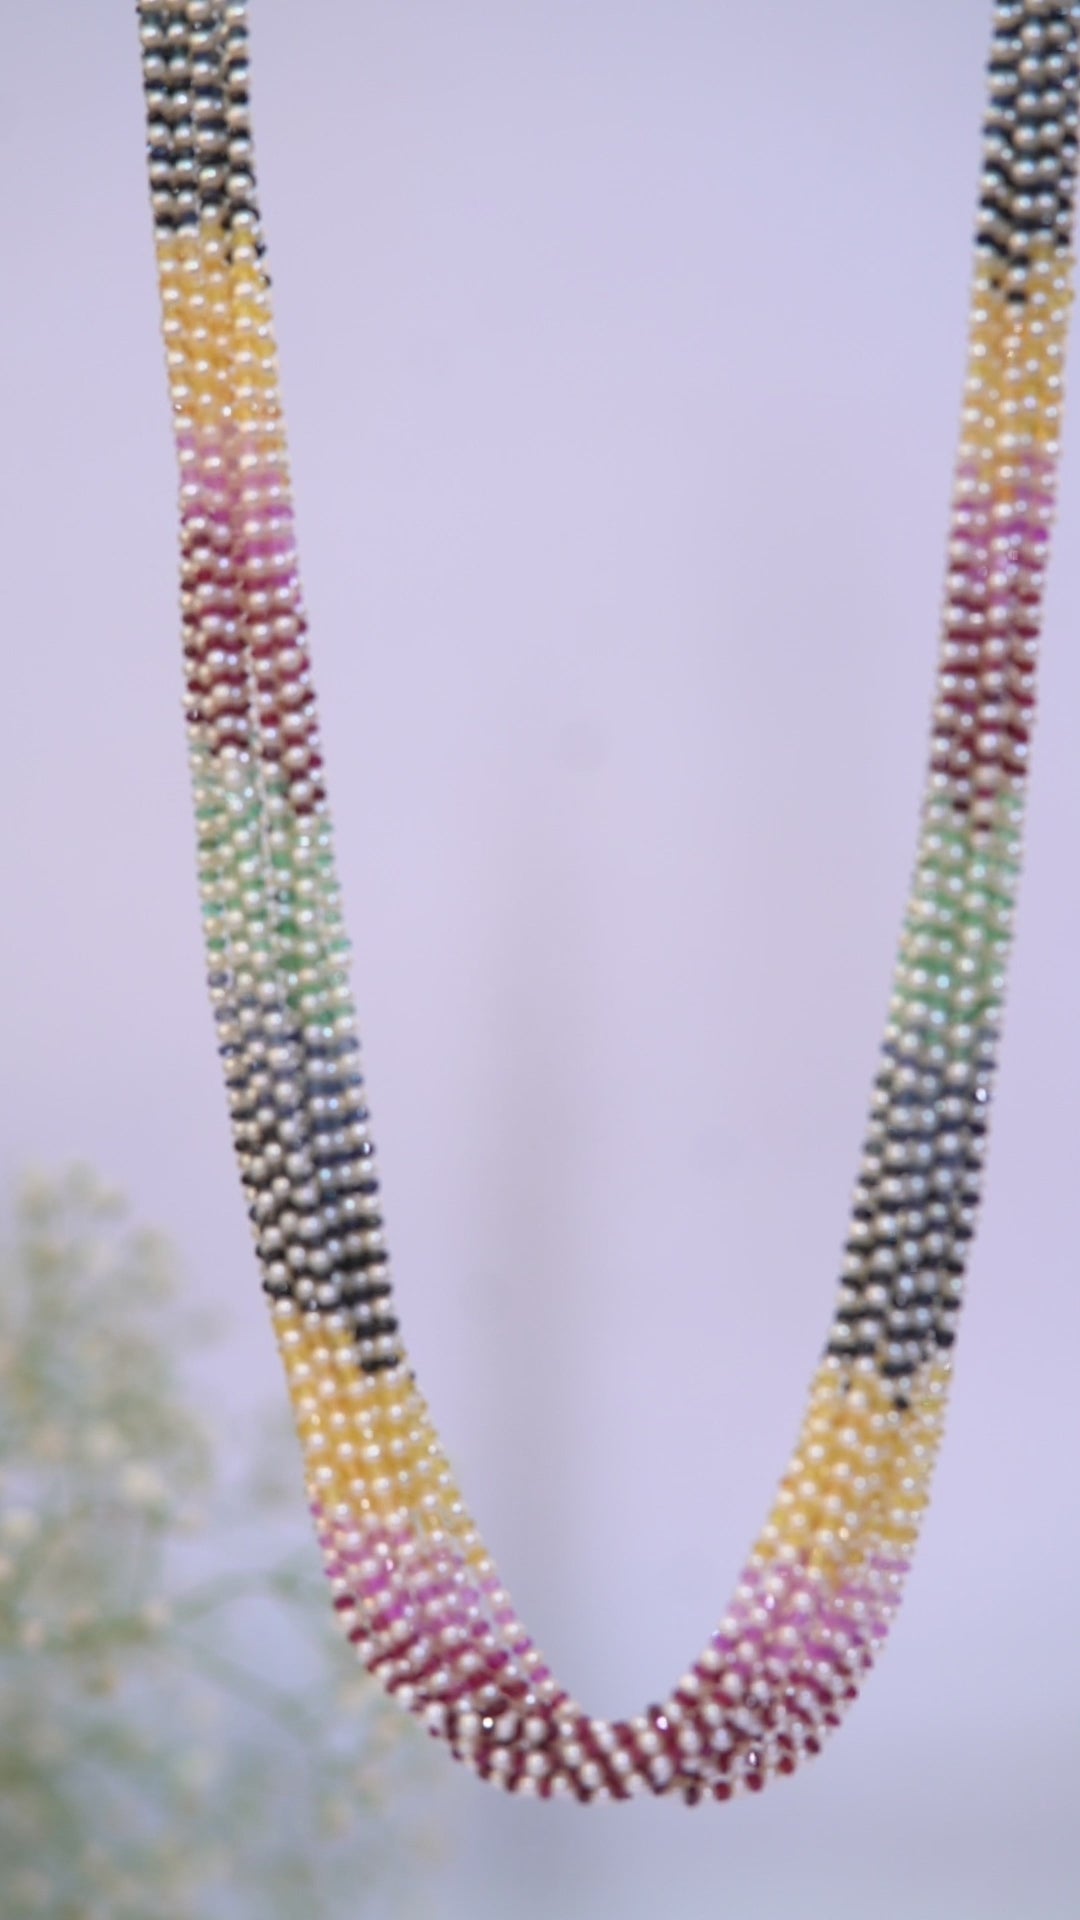 Nature's Symphony: Twisted Gemstone and Pearl Multi colour Necklace